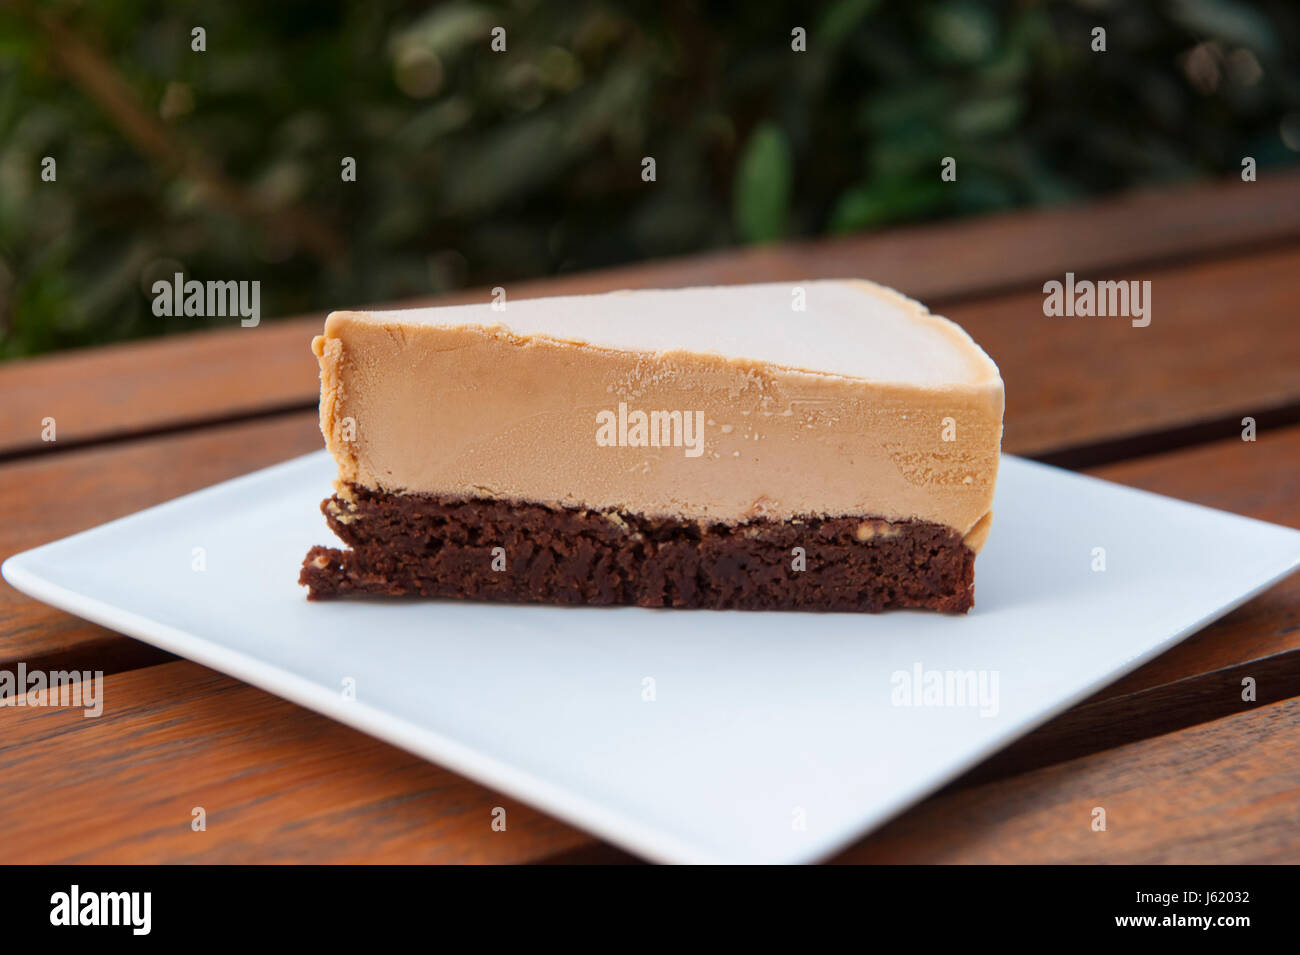 Slice of dulce de leche and chocolate brownie ice cream cake on a white plate outdoors Stock Photo